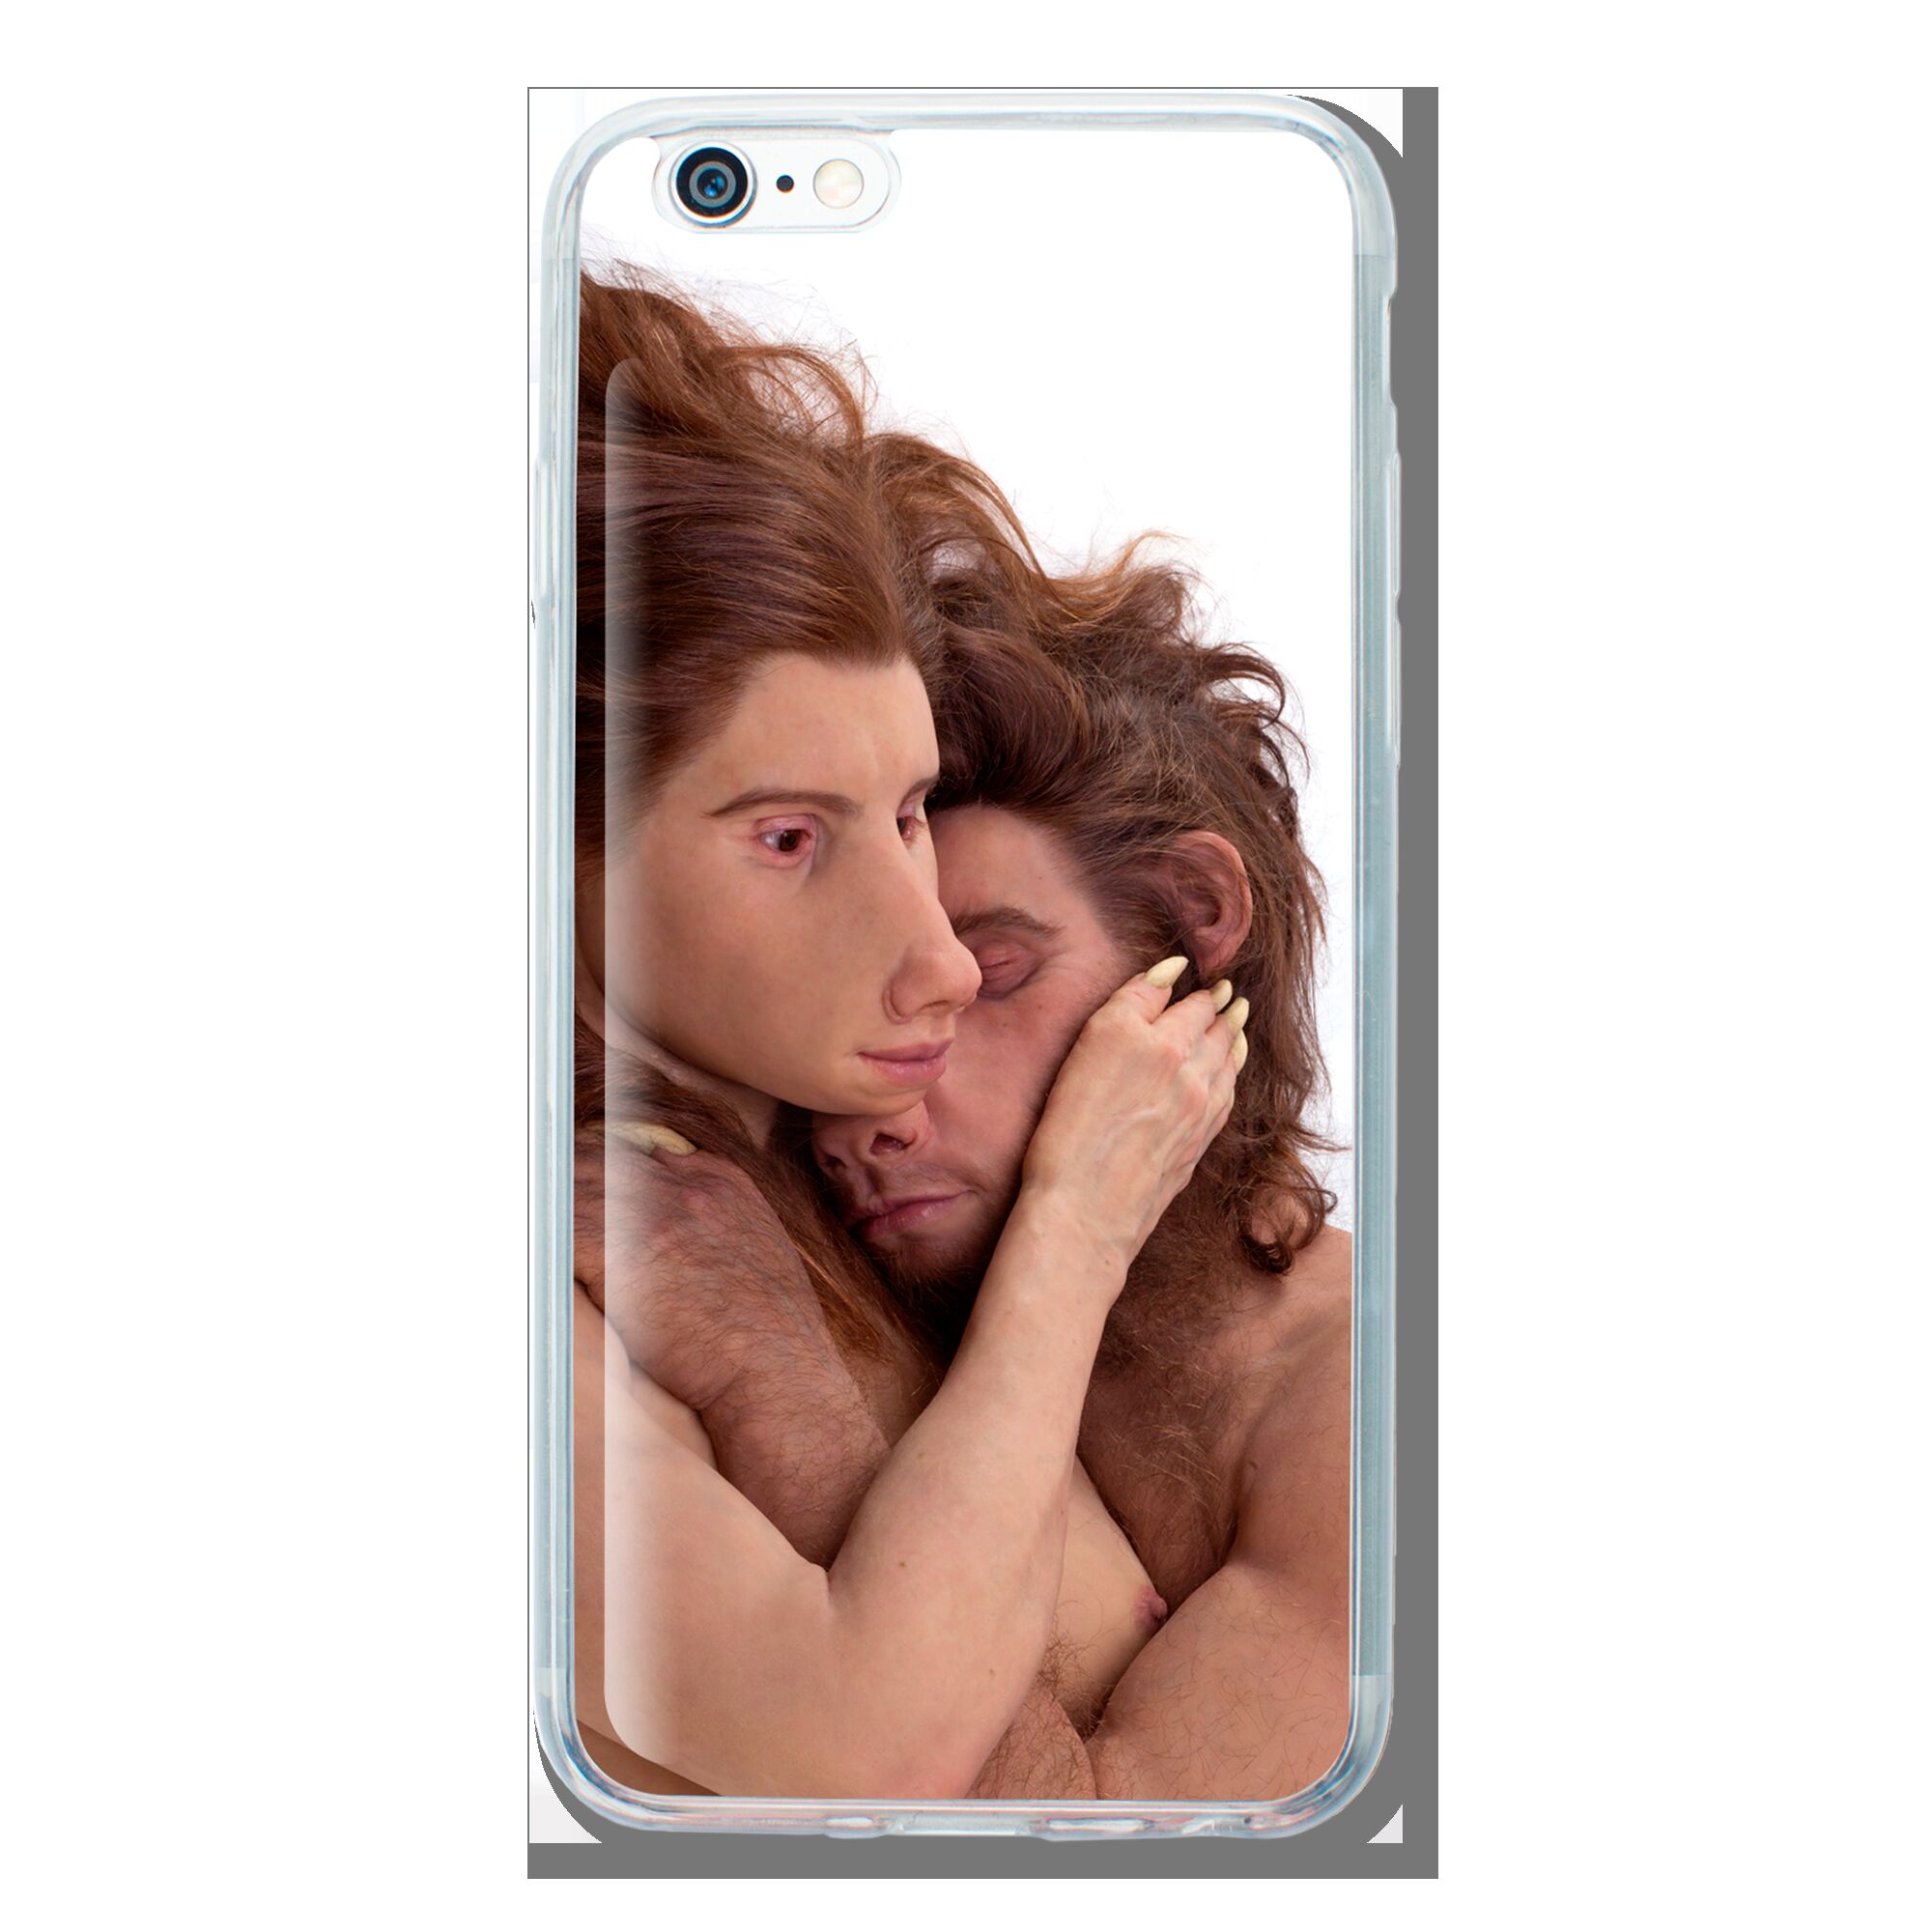 The Couple iPhone cover